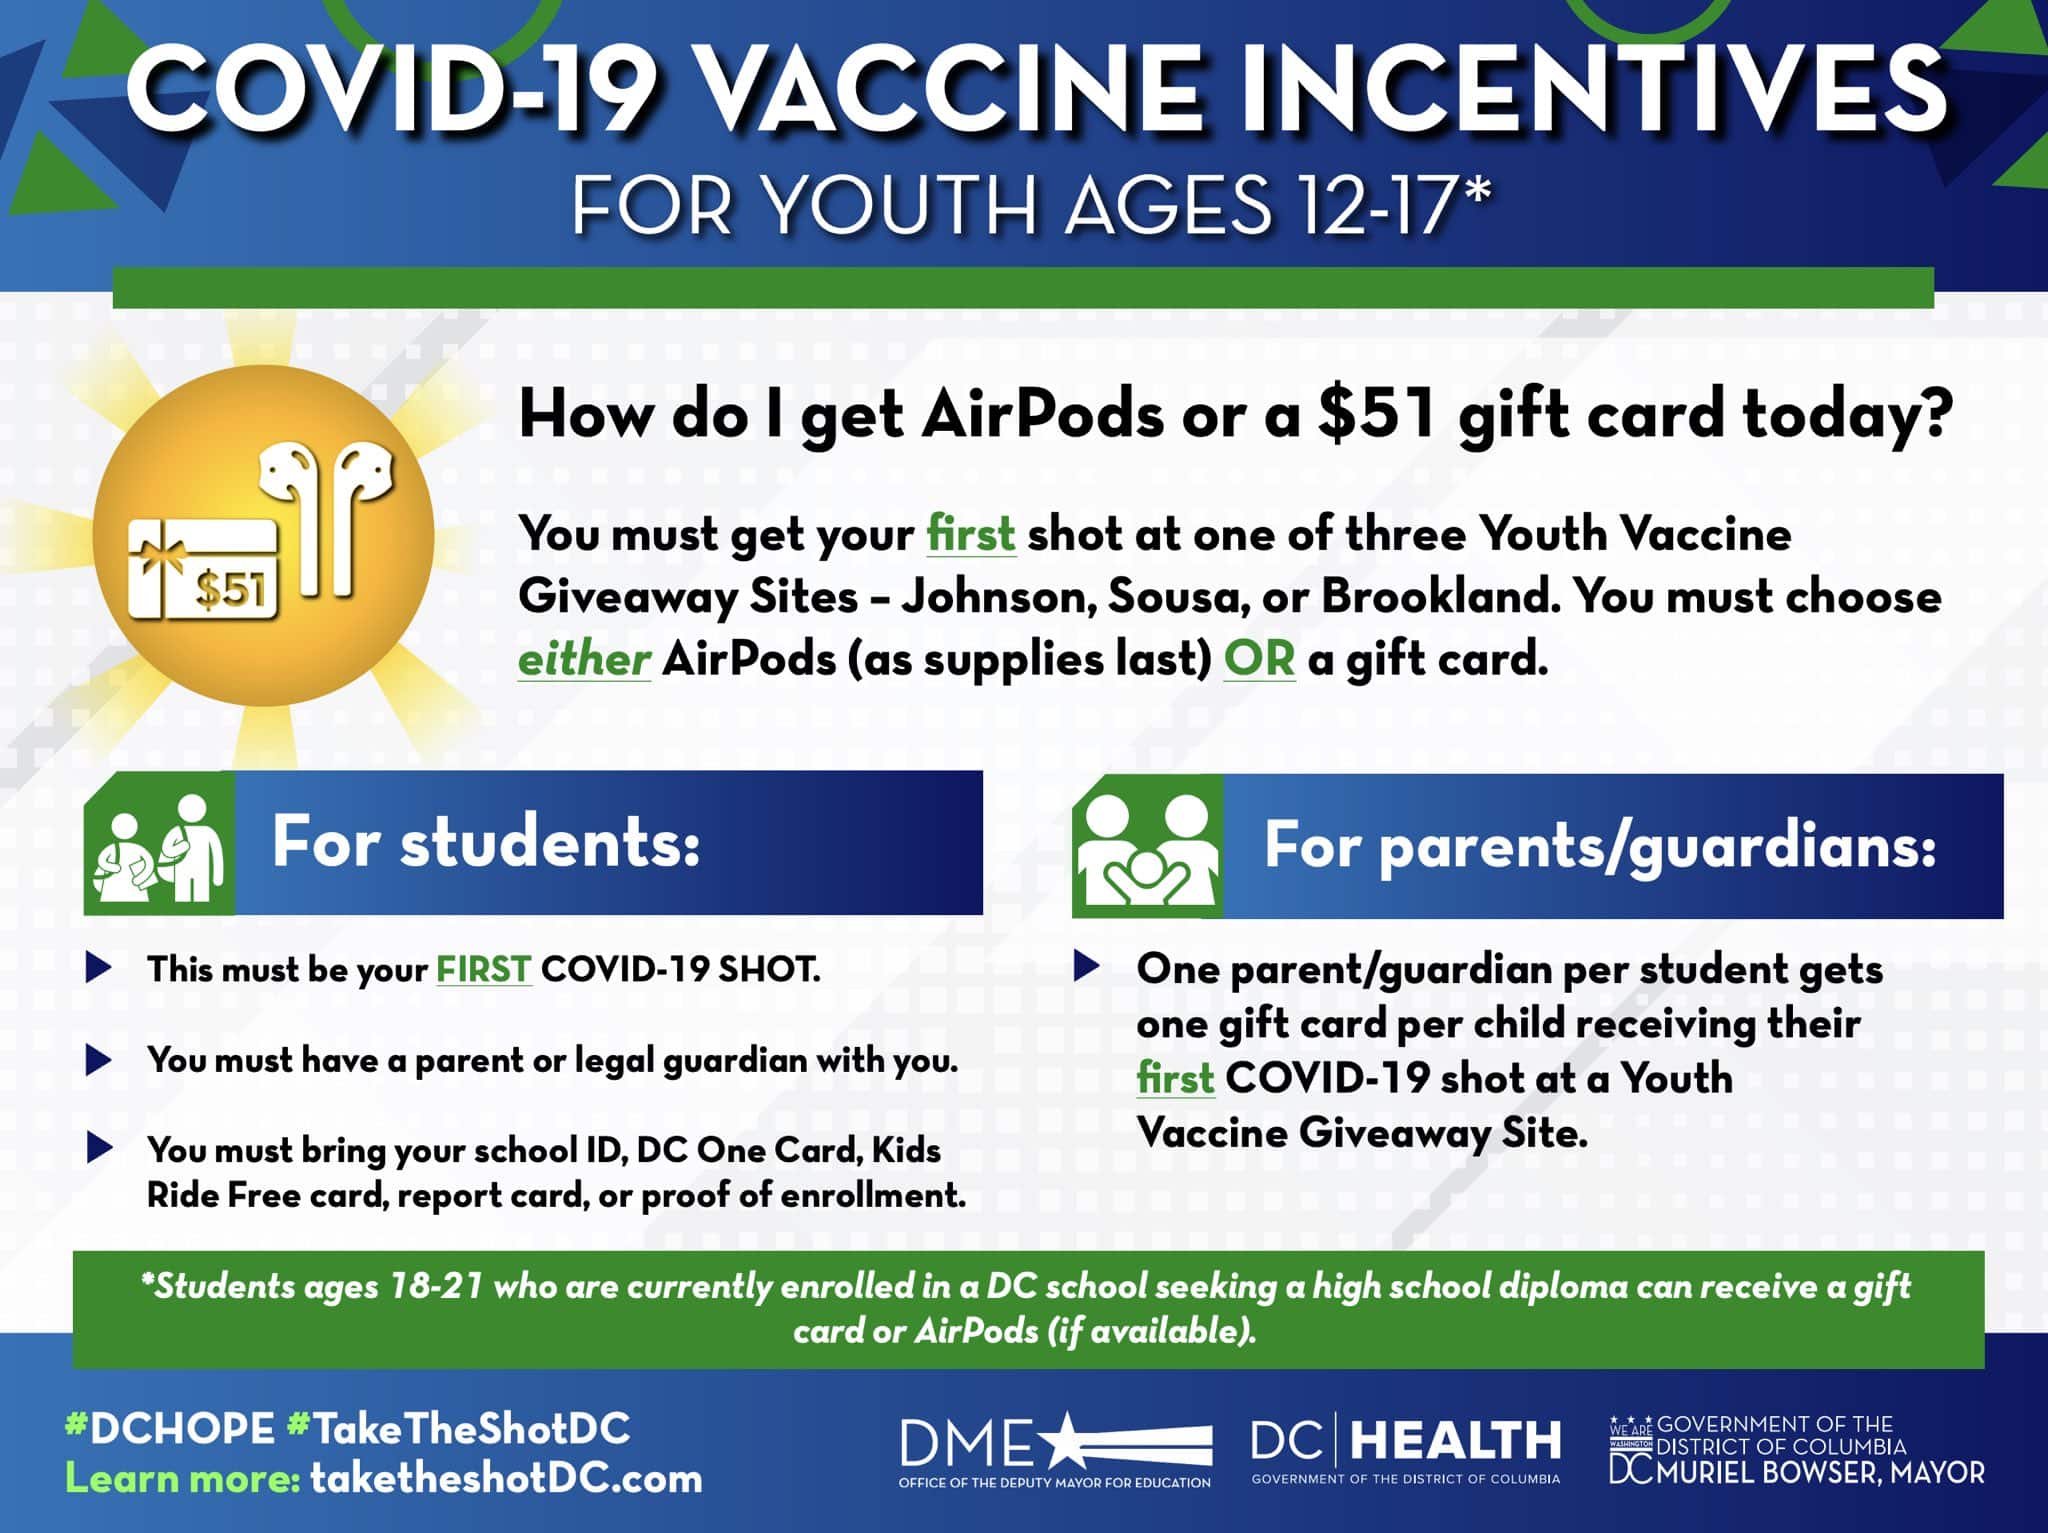 Washington offers free AirPods for COVID-19 vaccines